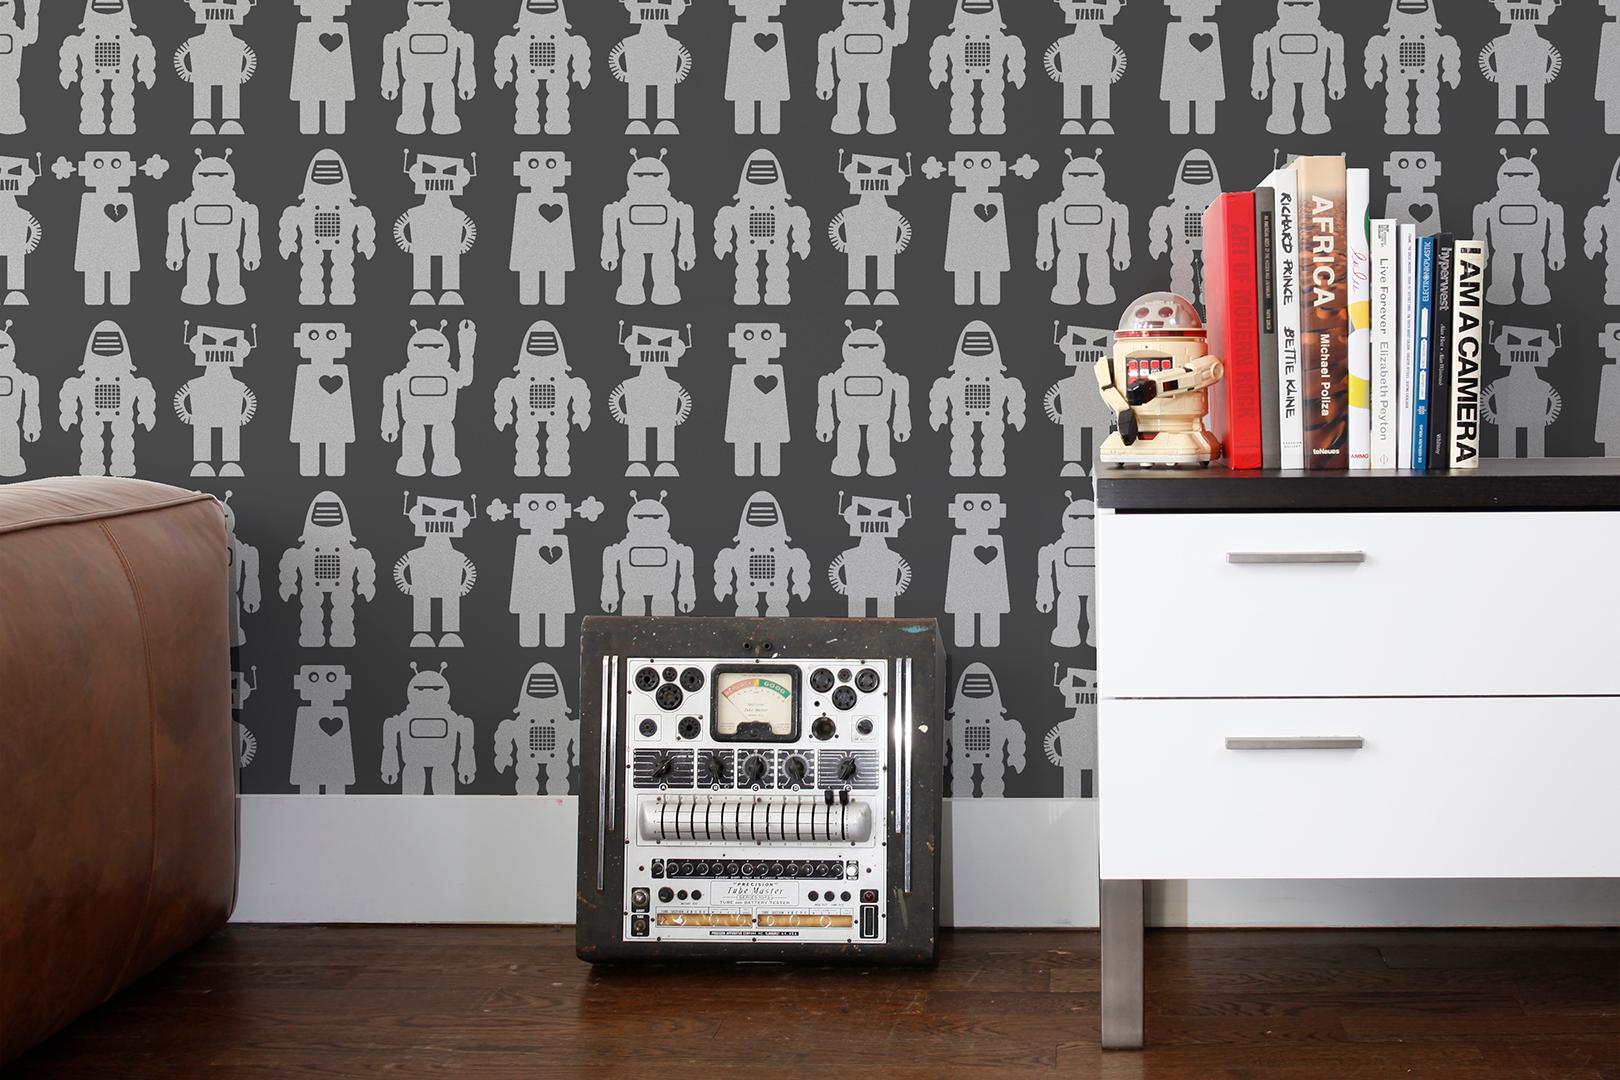 This classic robots pattern by Aimée is screen-printed by hand on clay-coated, FSC-certified paper.

Samples are available for $18 including US shipping, please message us to purchase.

Printing: Screen-printed by hand (minimum order and setup fees